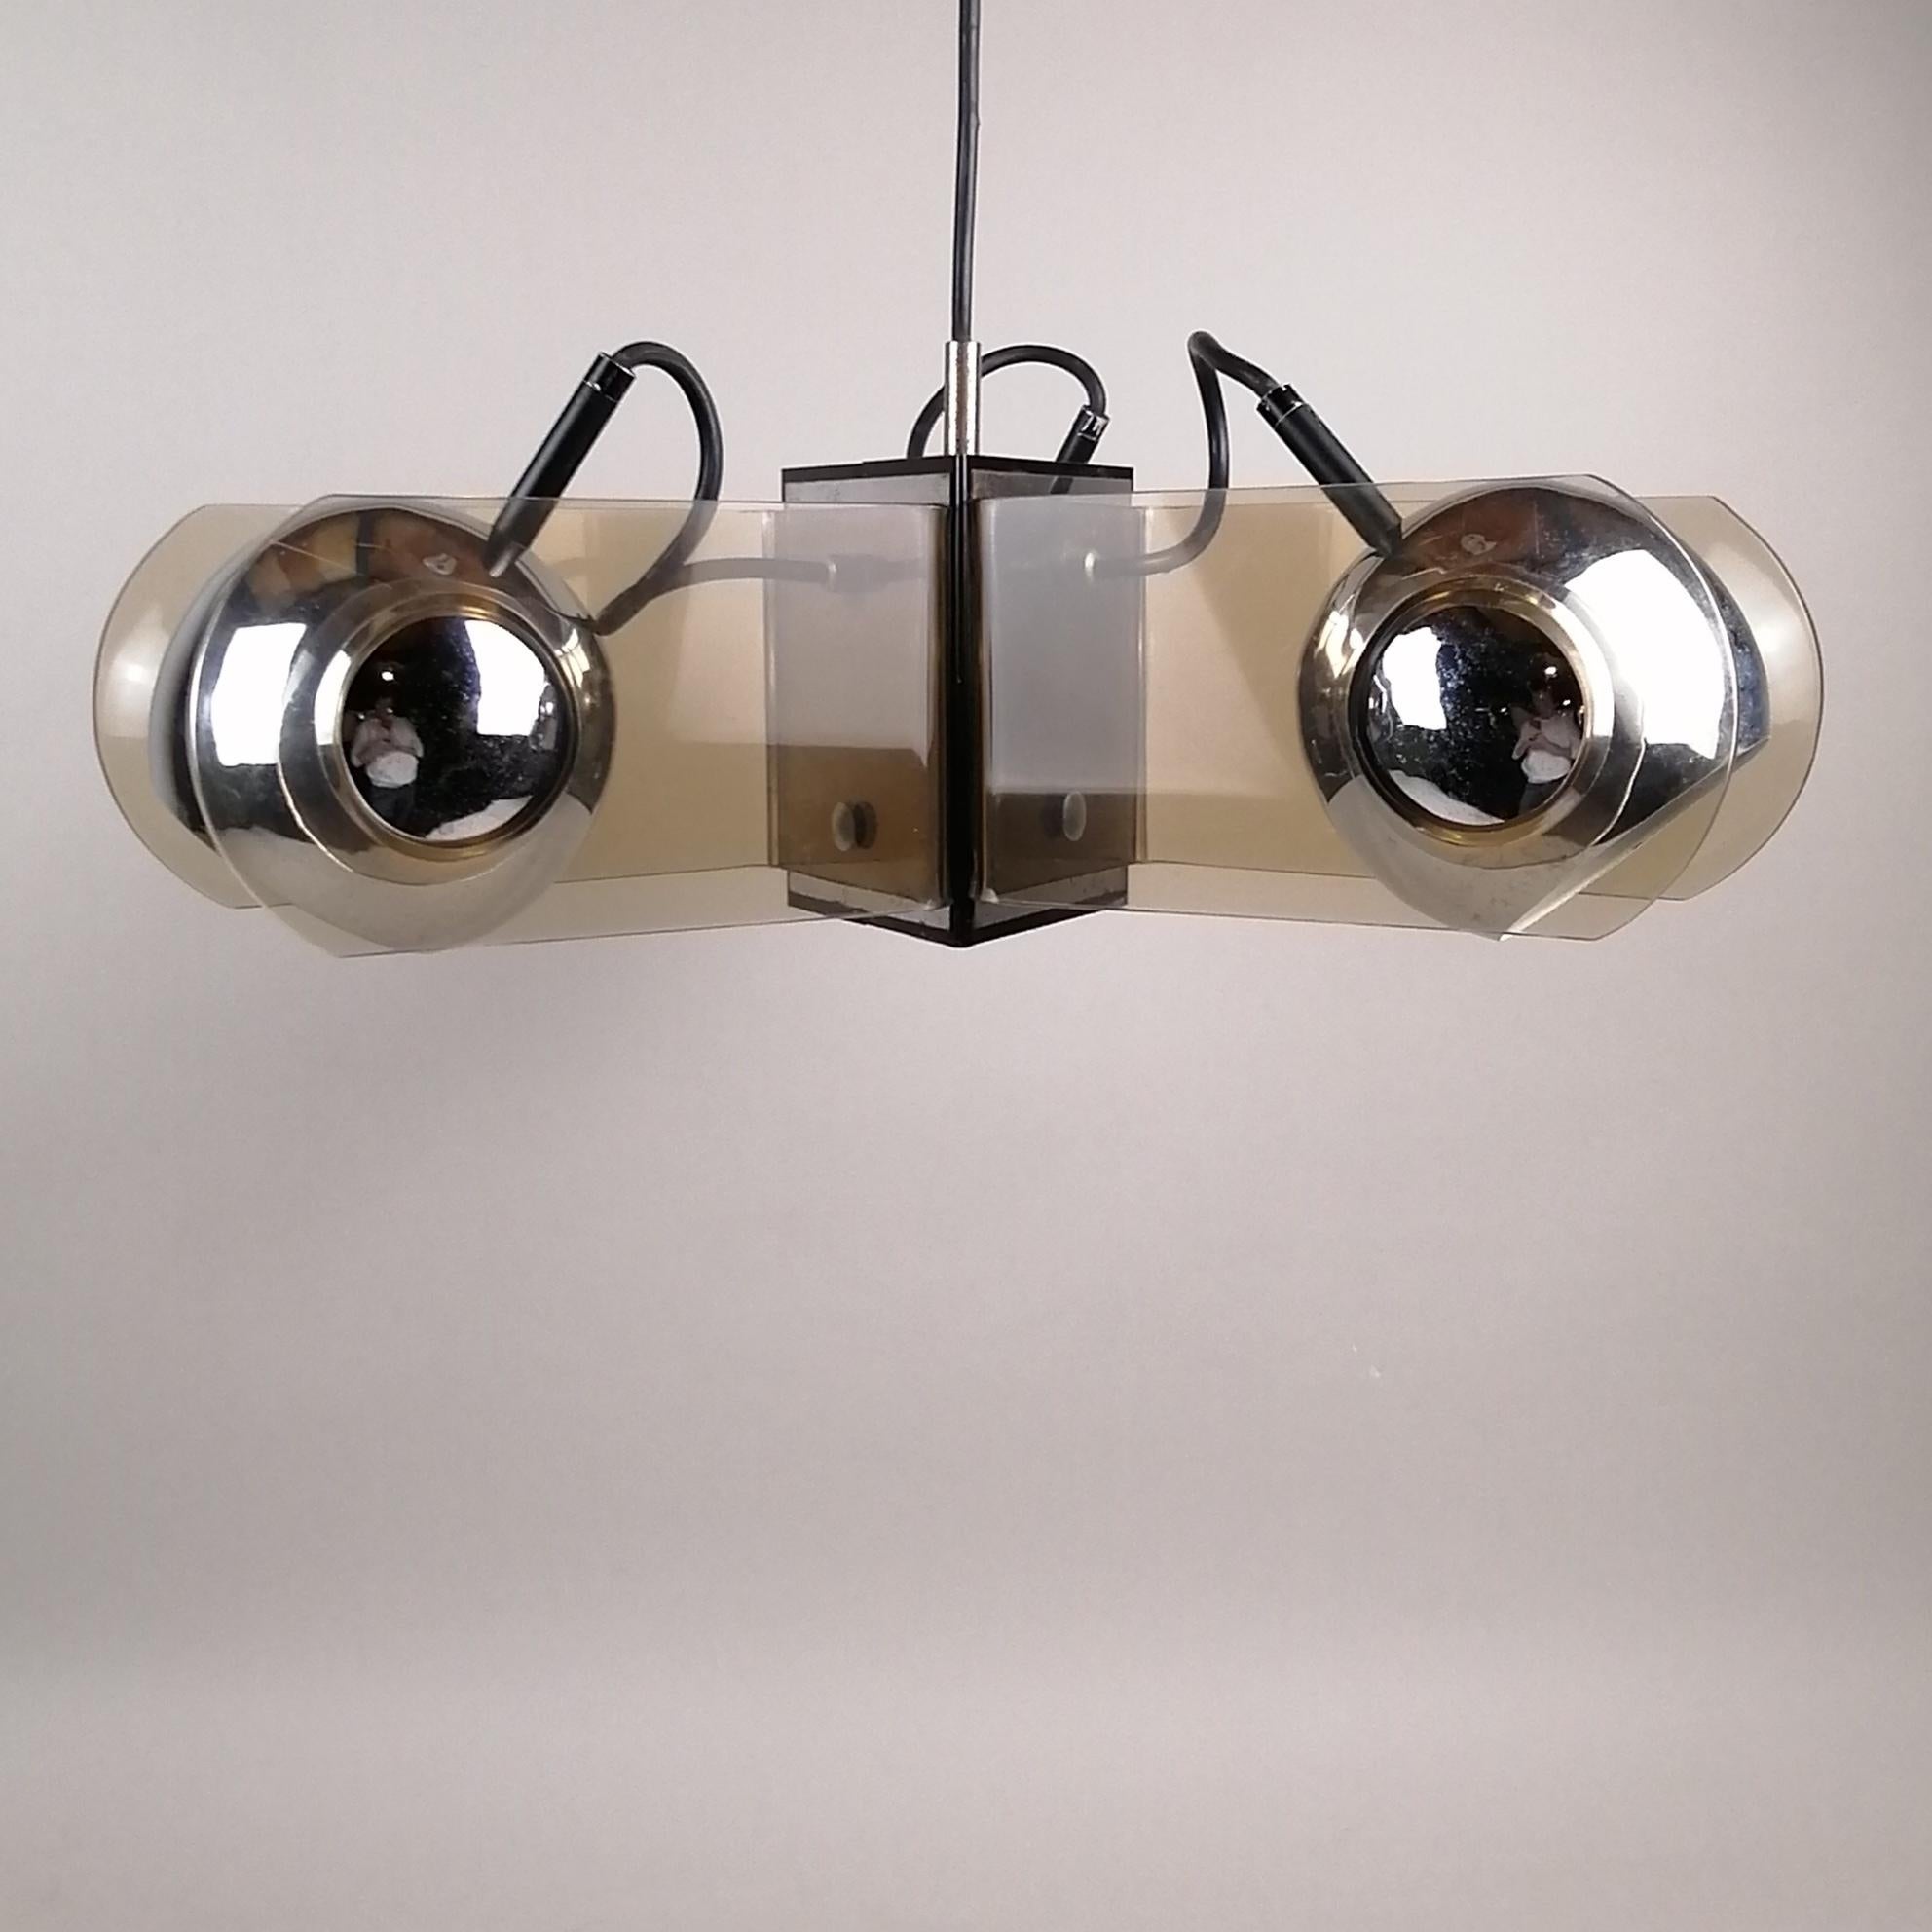 An acrylic and chrome metal ceiling lamp in the style of Gino Sarfatti. The smoked acrylic structure shows 3 adjustable chrome spheres.